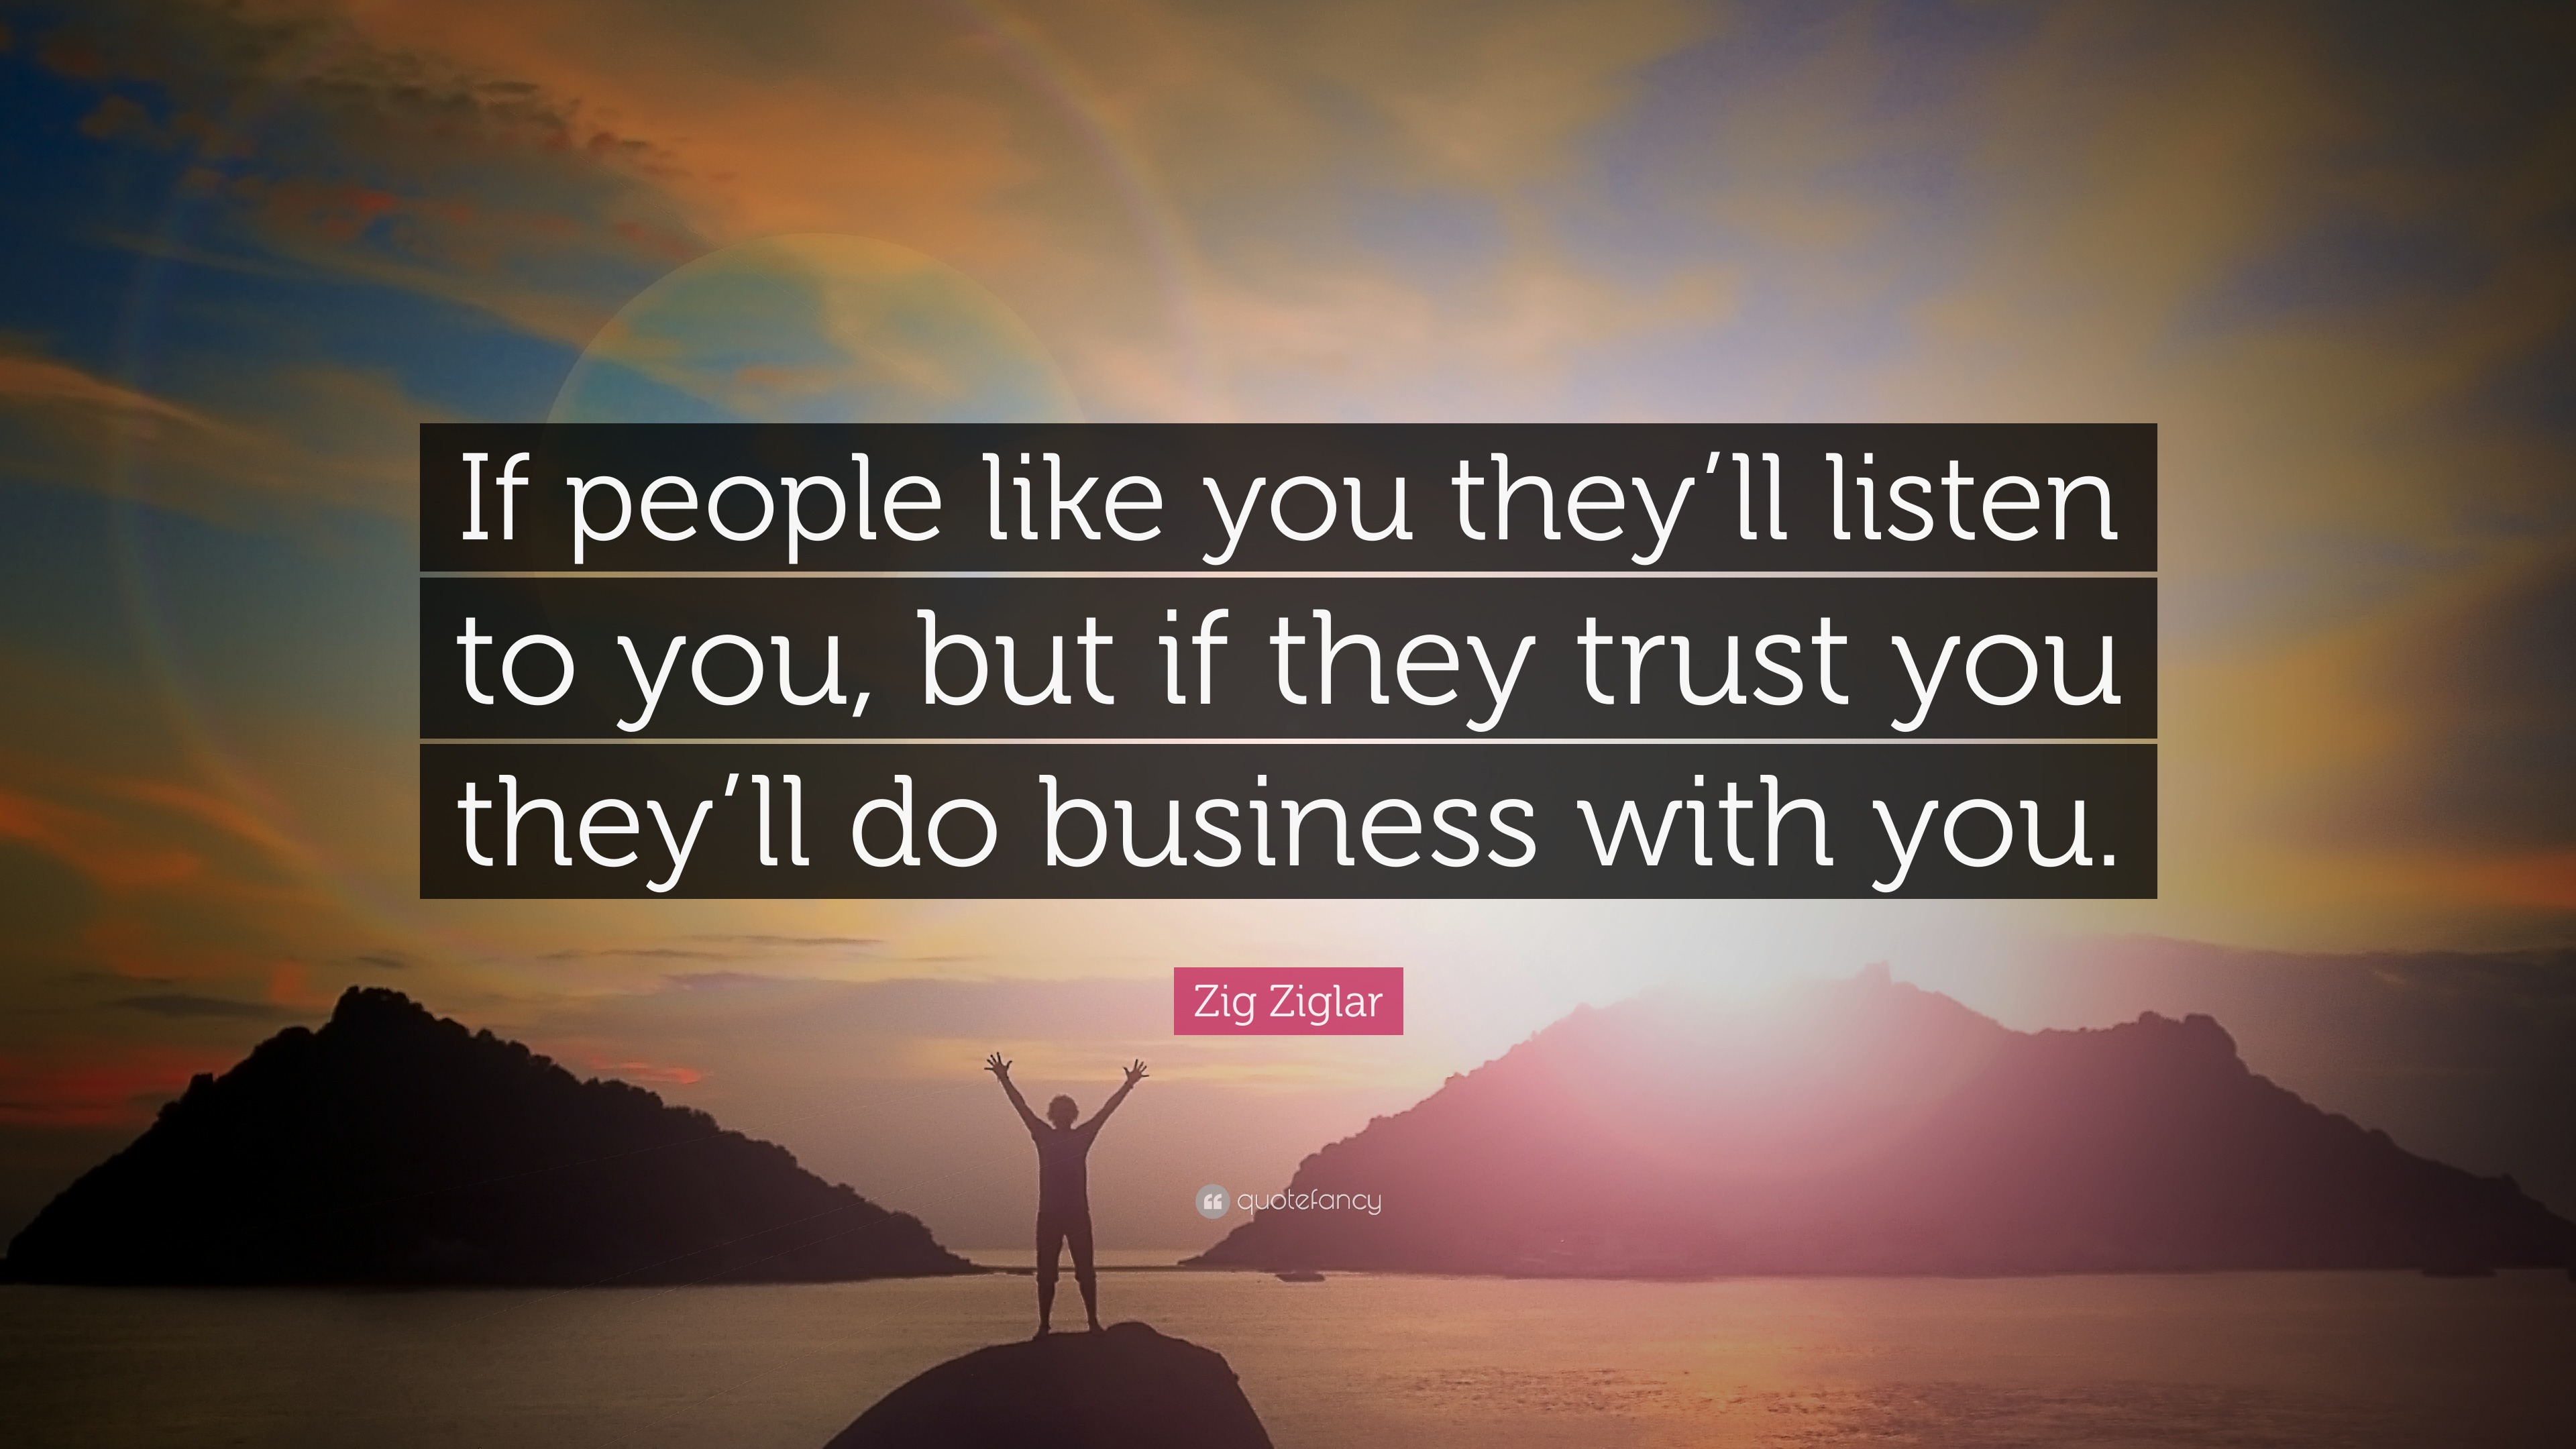 Zig Ziglar Quote: “If people like you they’ll listen to you, but if